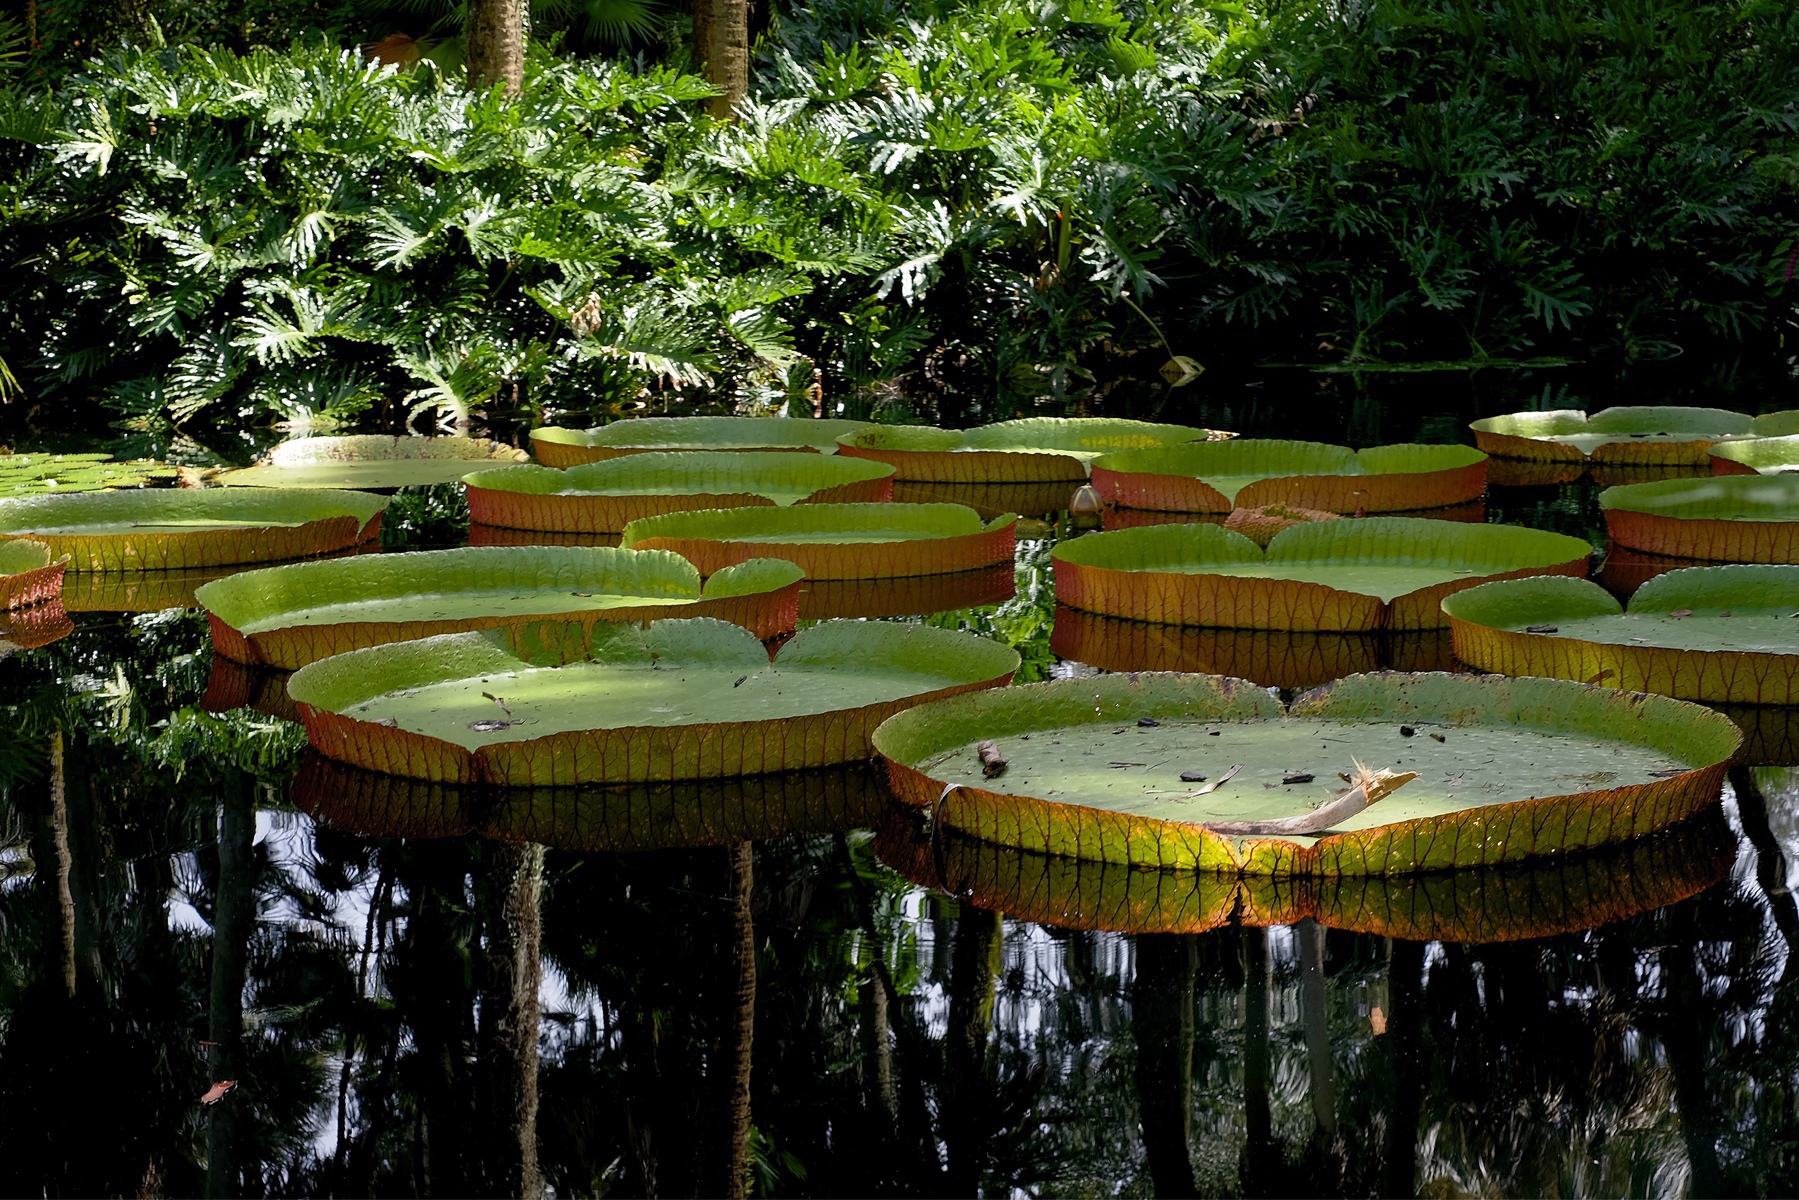 Giant Victoria Water Lilies